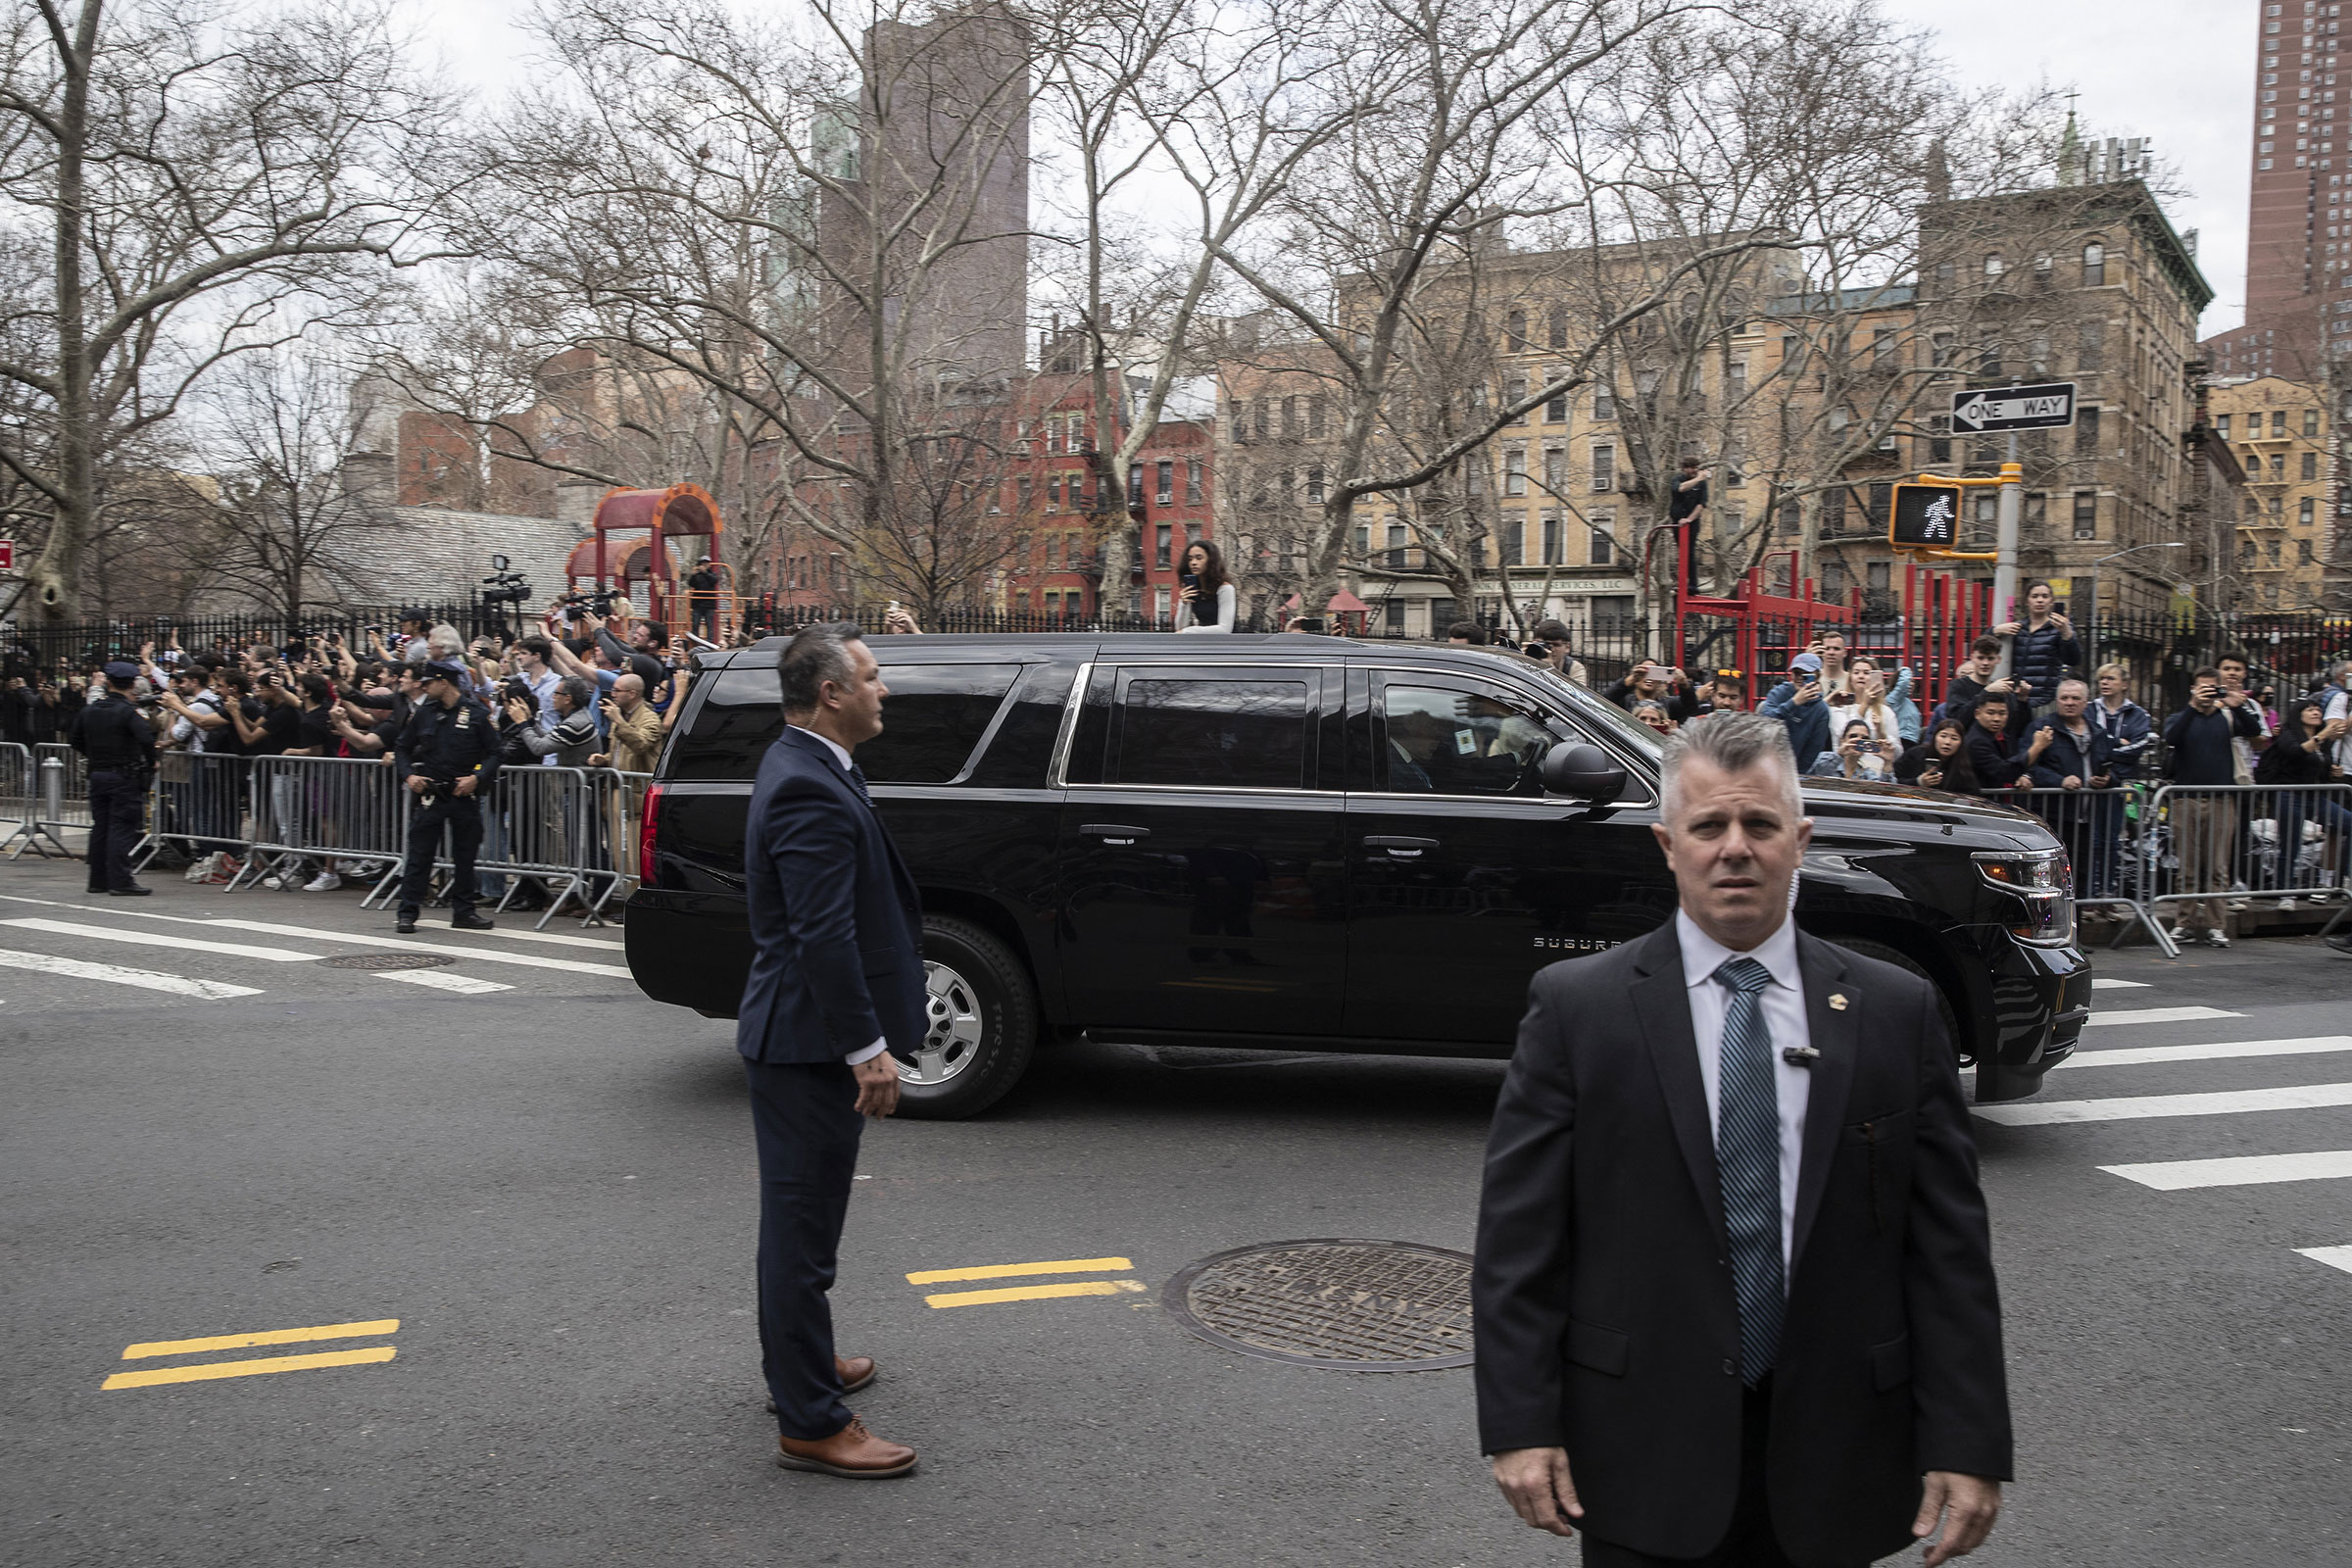 A motorcade, carrying former President Donald Trump, leaves criminal court in New York City, on April 4, 2023.